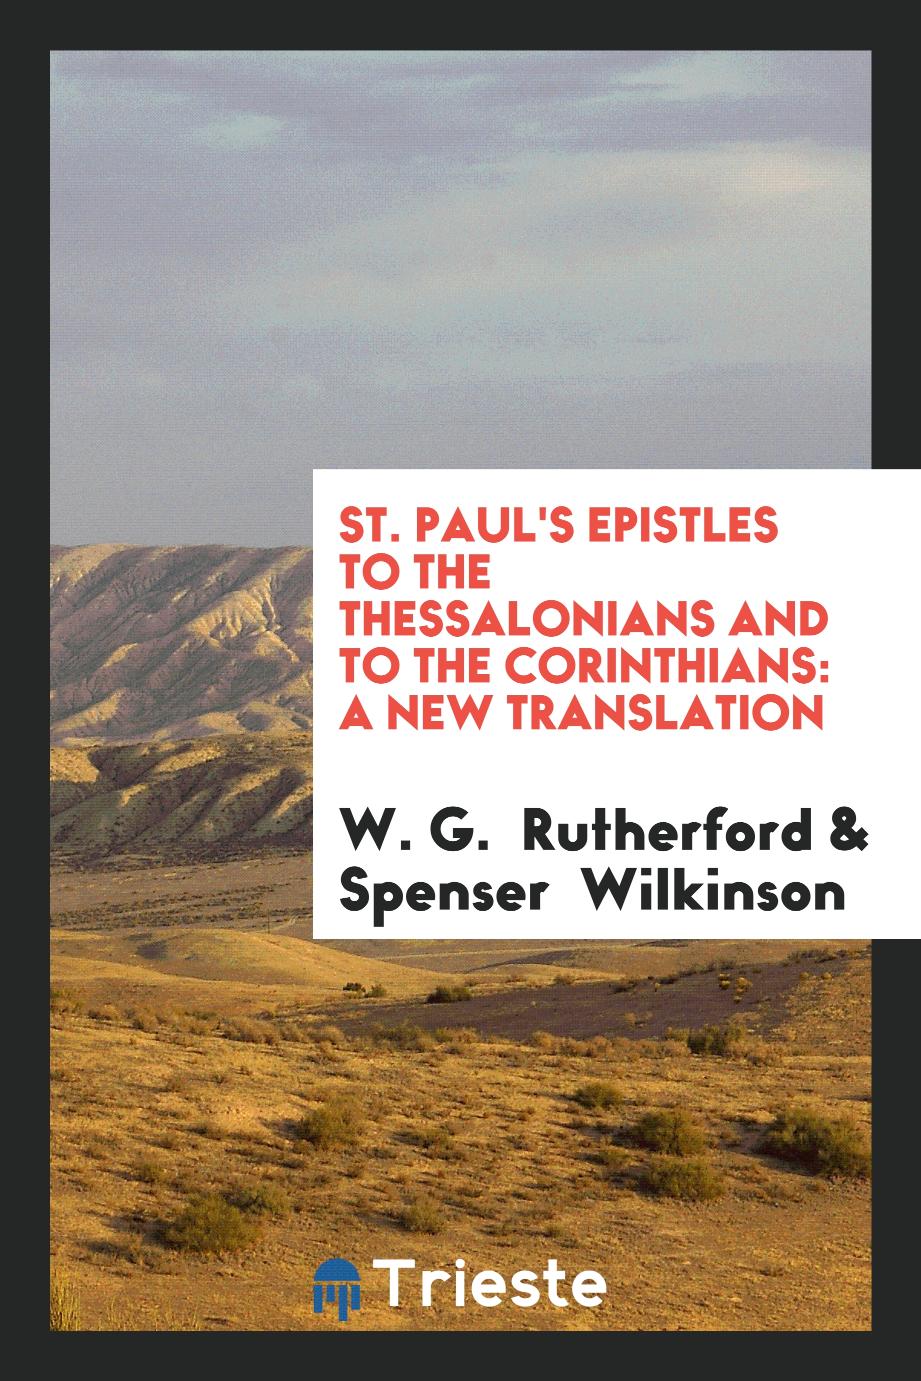 St. Paul's Epistles to the Thessalonians and to the Corinthians: A New Translation